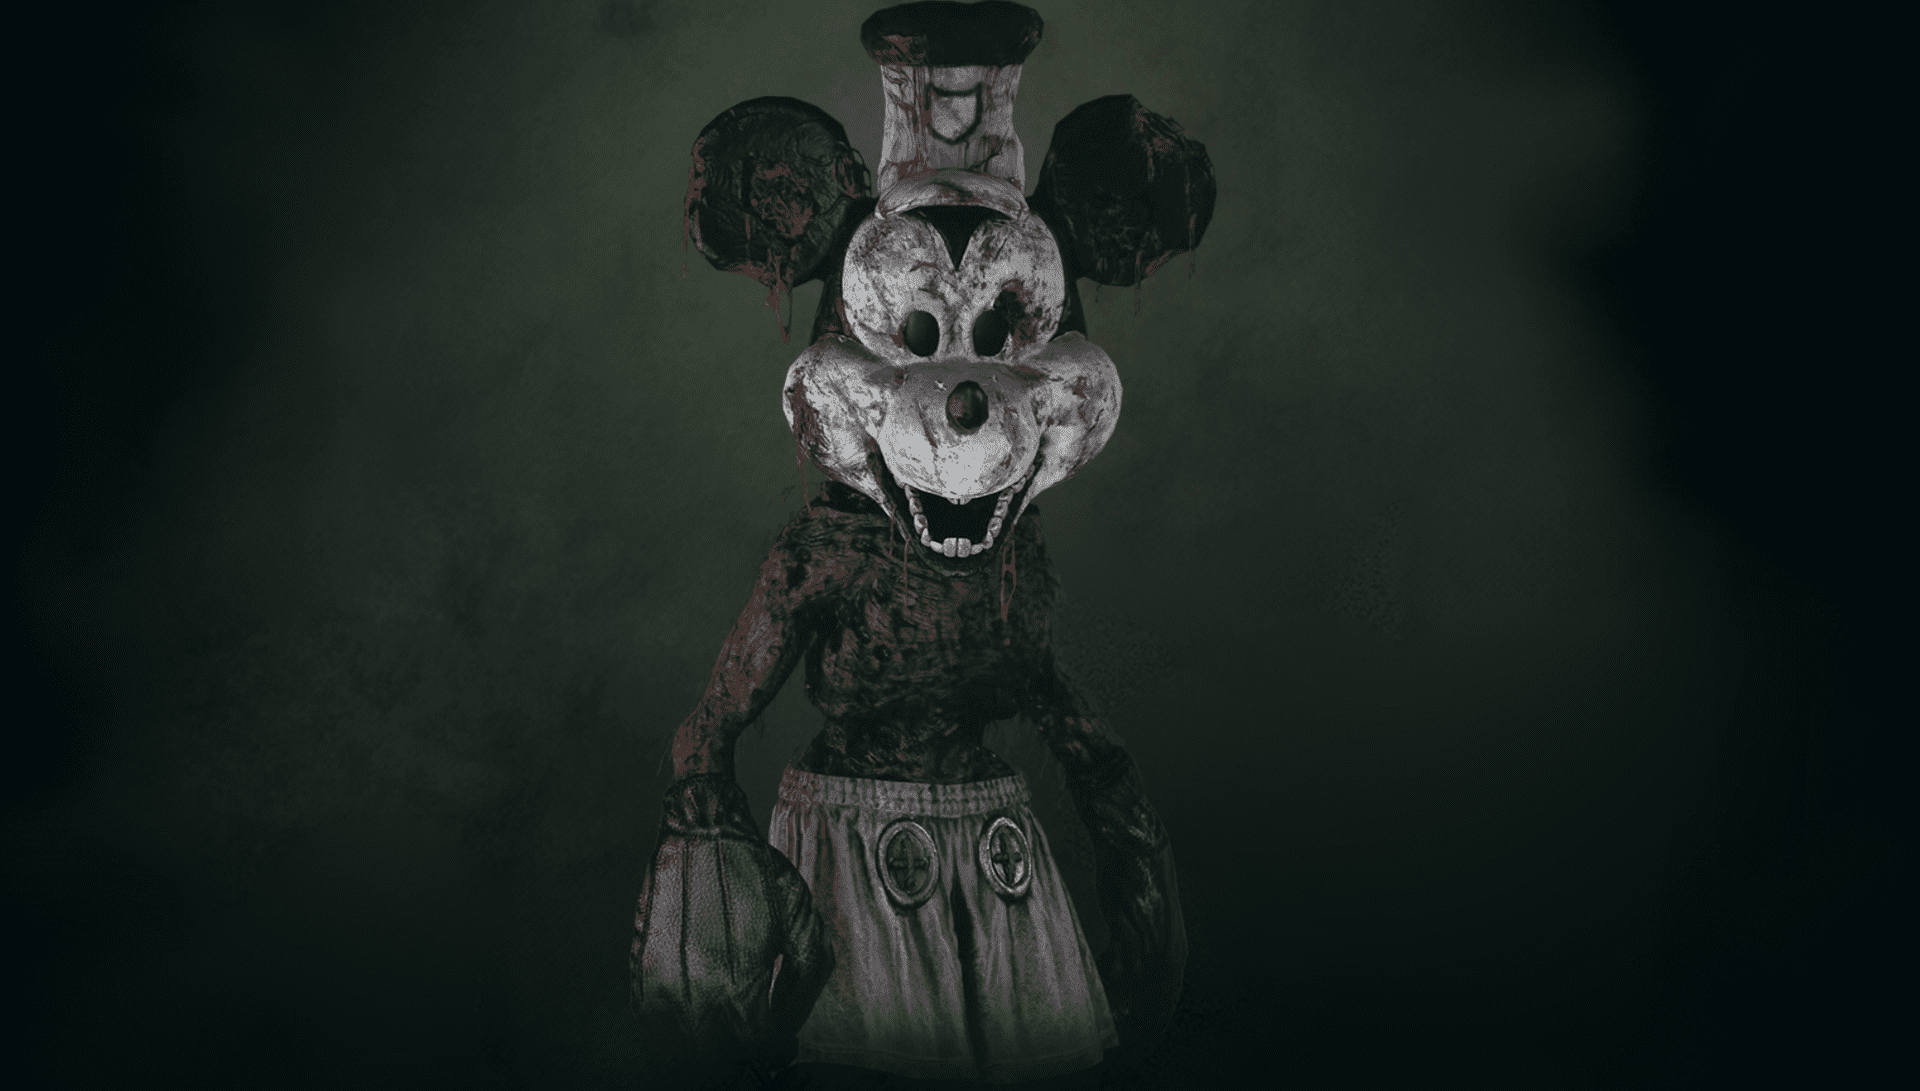 mickey-mouse-must-be-exterminated-in-new-horror-game-infestation-88